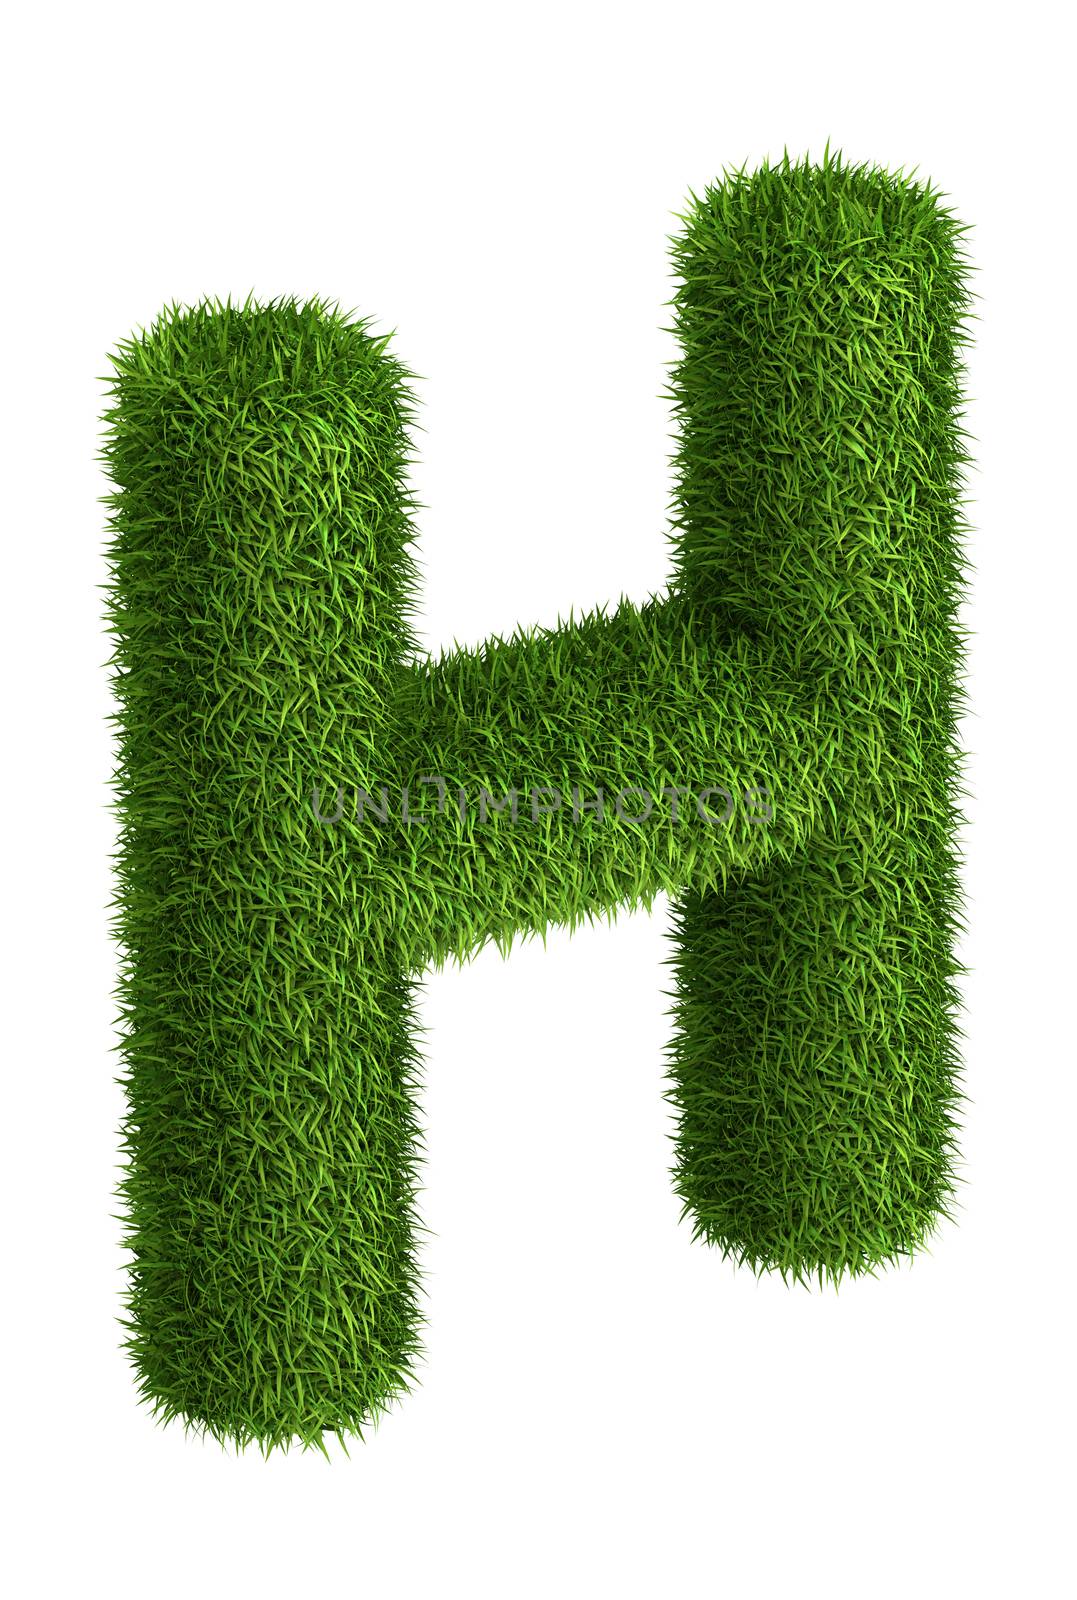 3D Letter H photo realistic isometric projection grass ecology theme on white